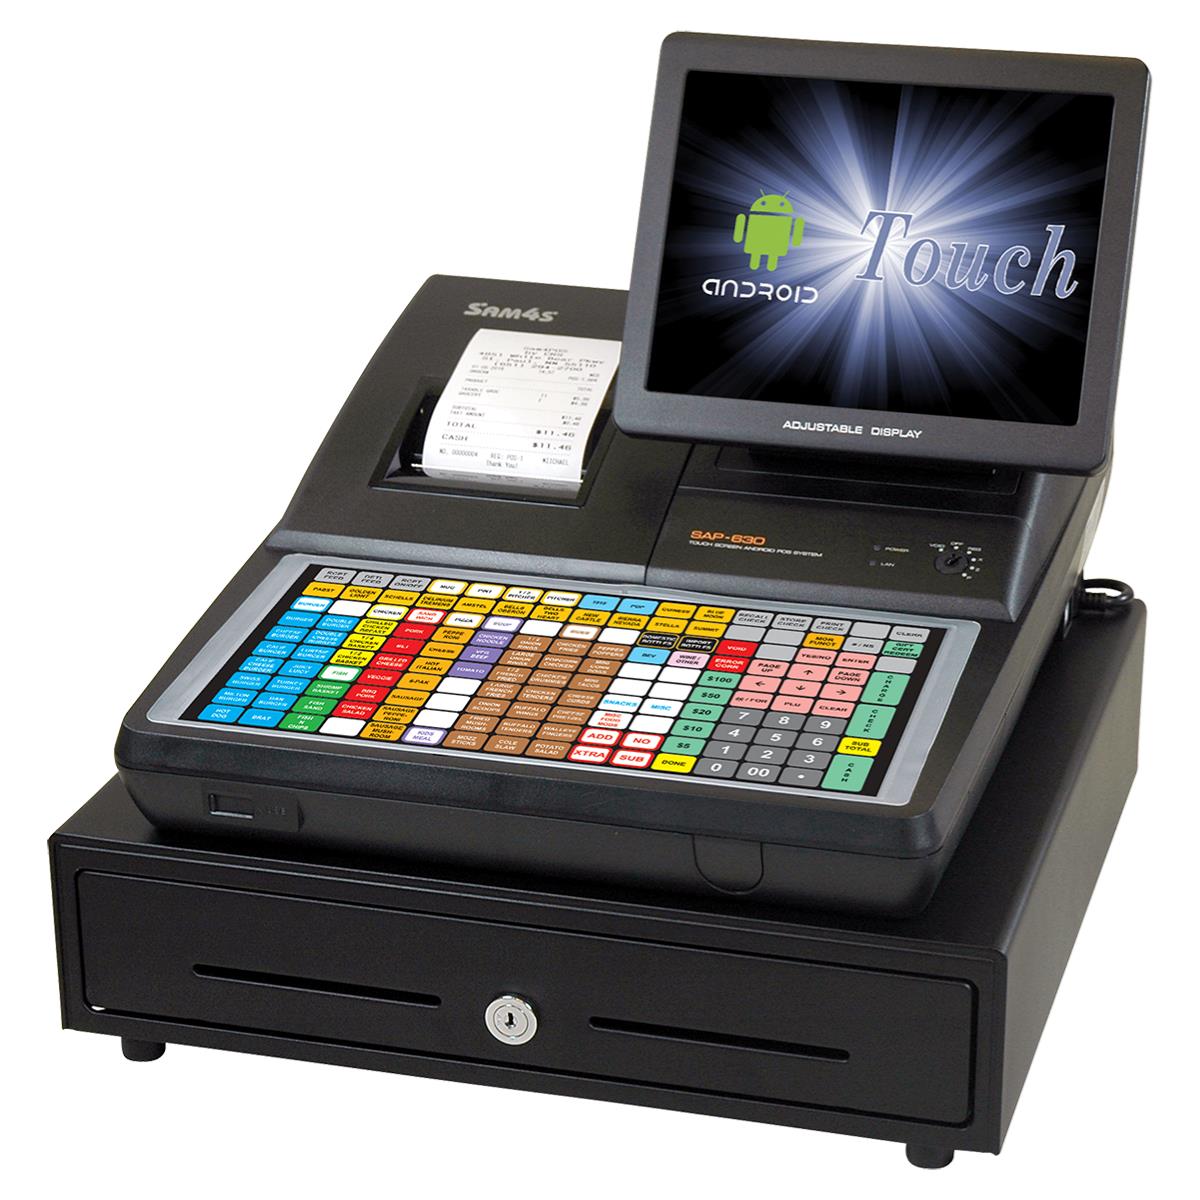 An electronic cash register with a touch screen display and a built-in printer. the screen shows a colorful keypad interface.